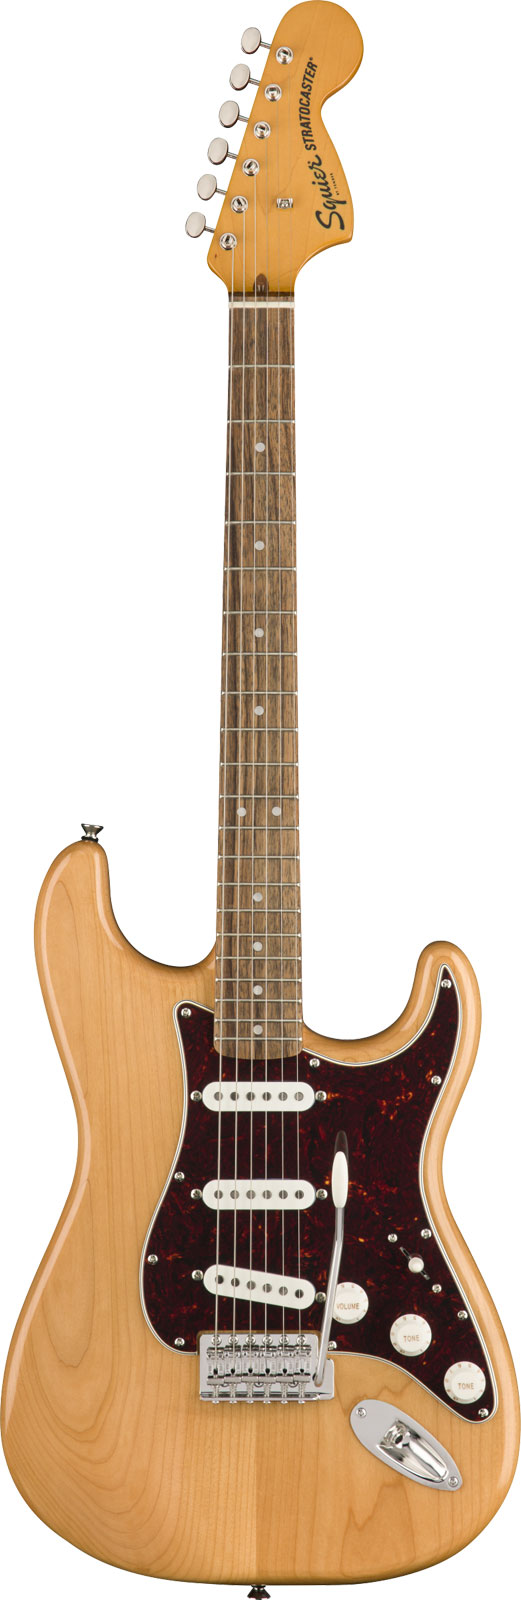 SQUIER STRATOCASTER LRL NATURAL